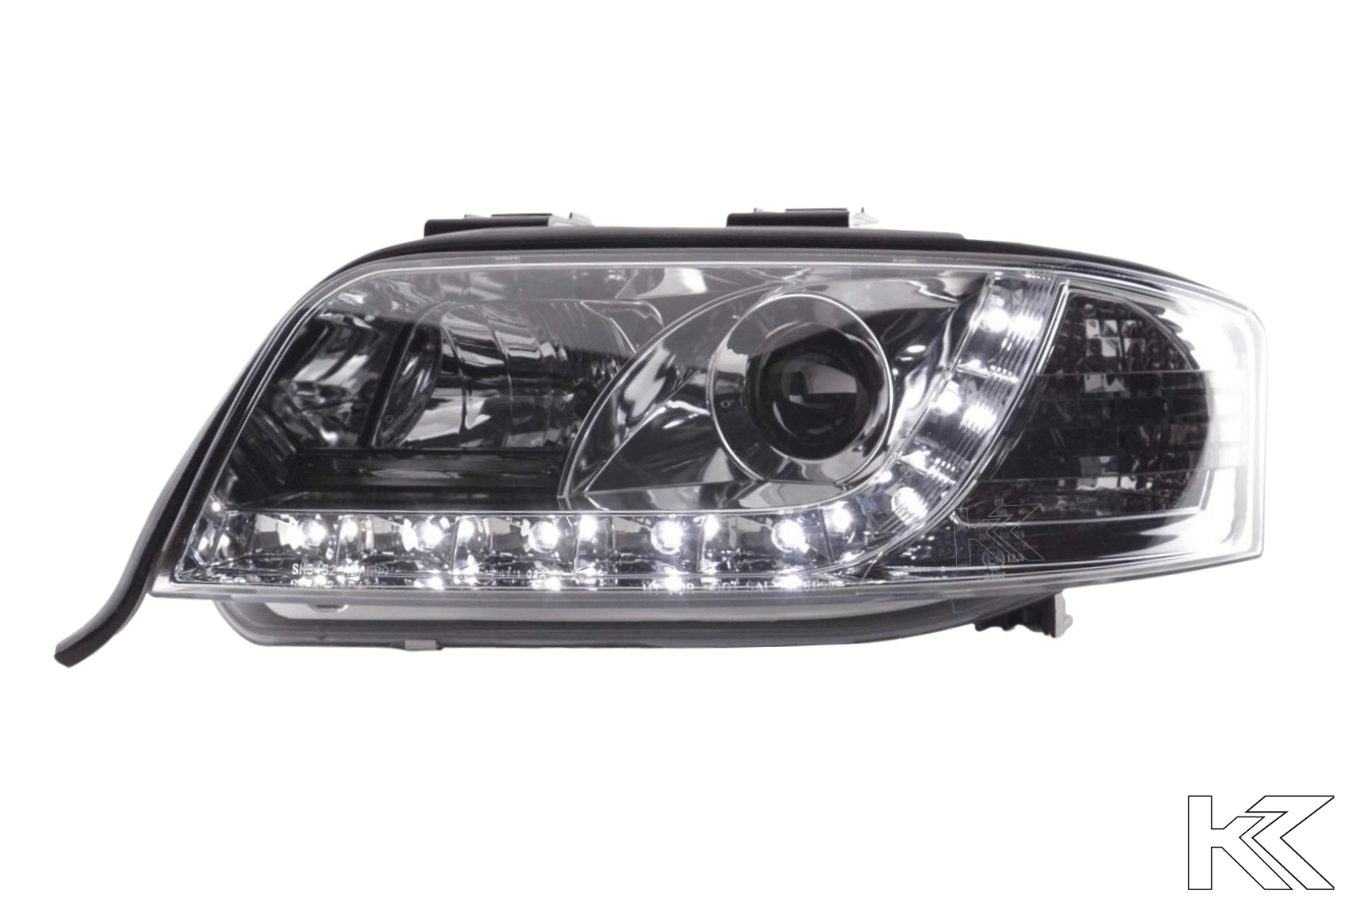 Audi A6 (C5 4B) Chrome LED Headlights with Daytime Running Lights (2001-2004) - K2 Industries